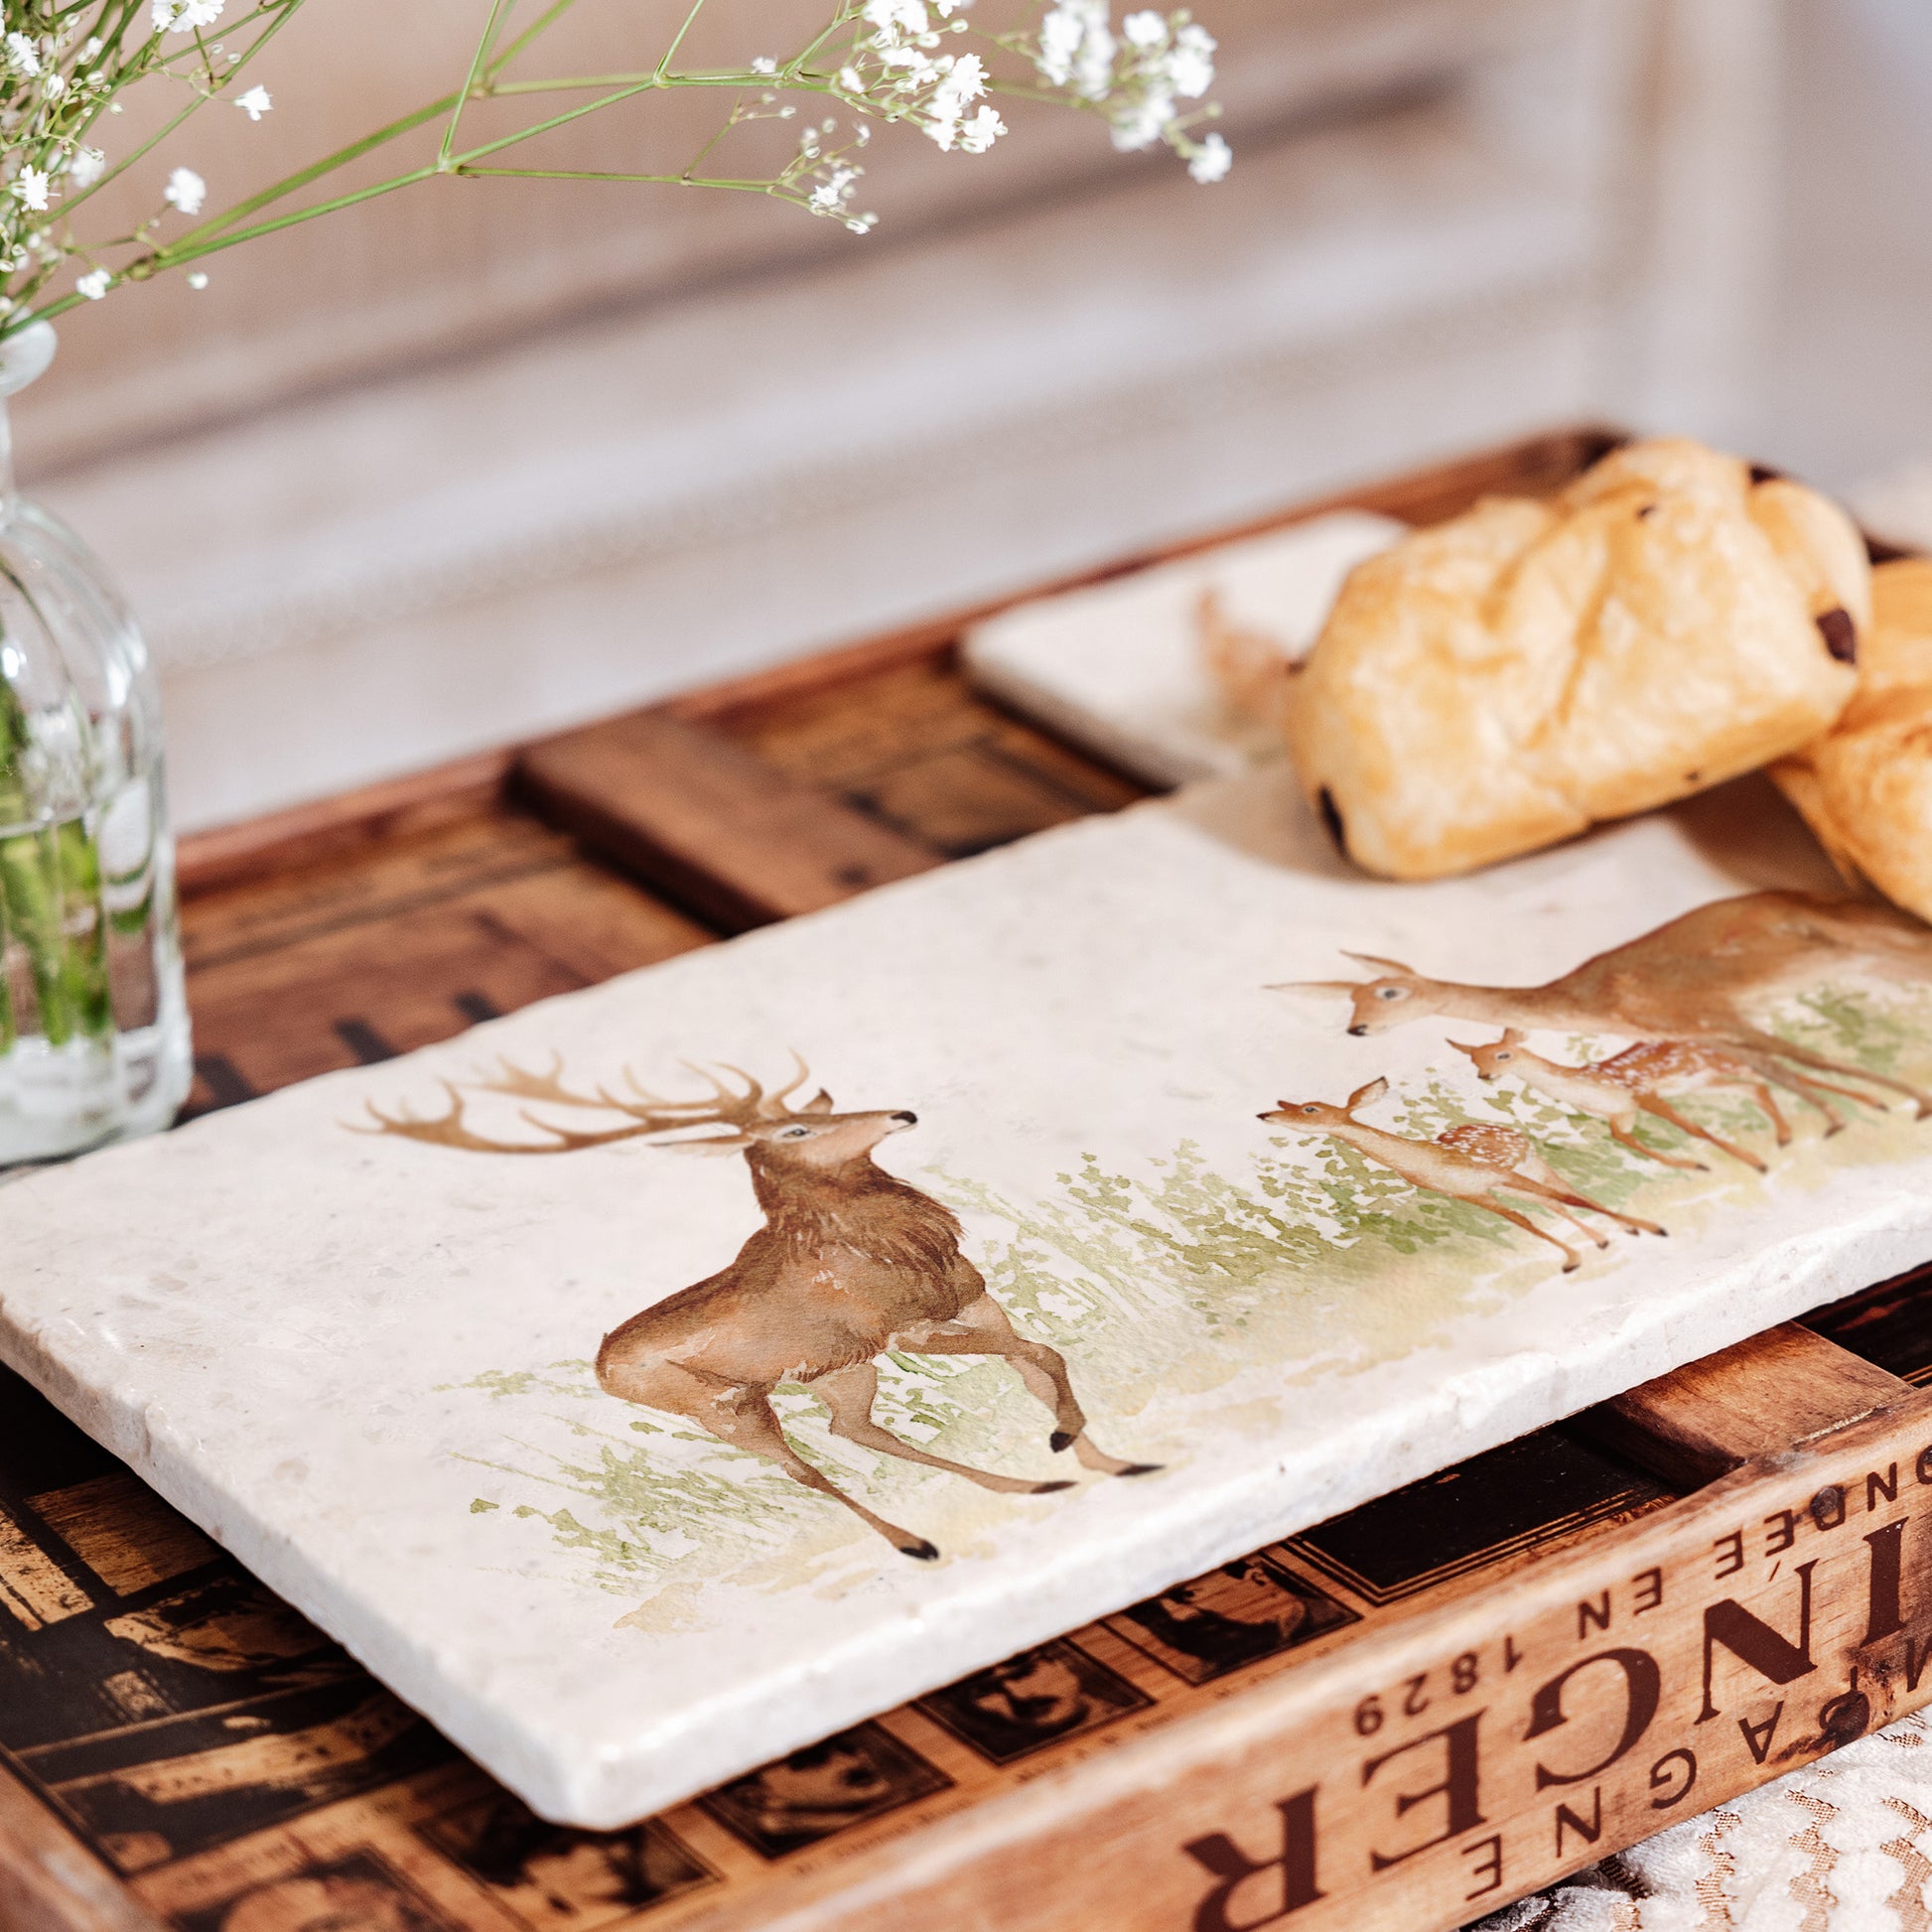 A rectangle marble board with a red deer family watercolour design featuring a stag, hind and two fawns. The platter is being used to serve pastries.